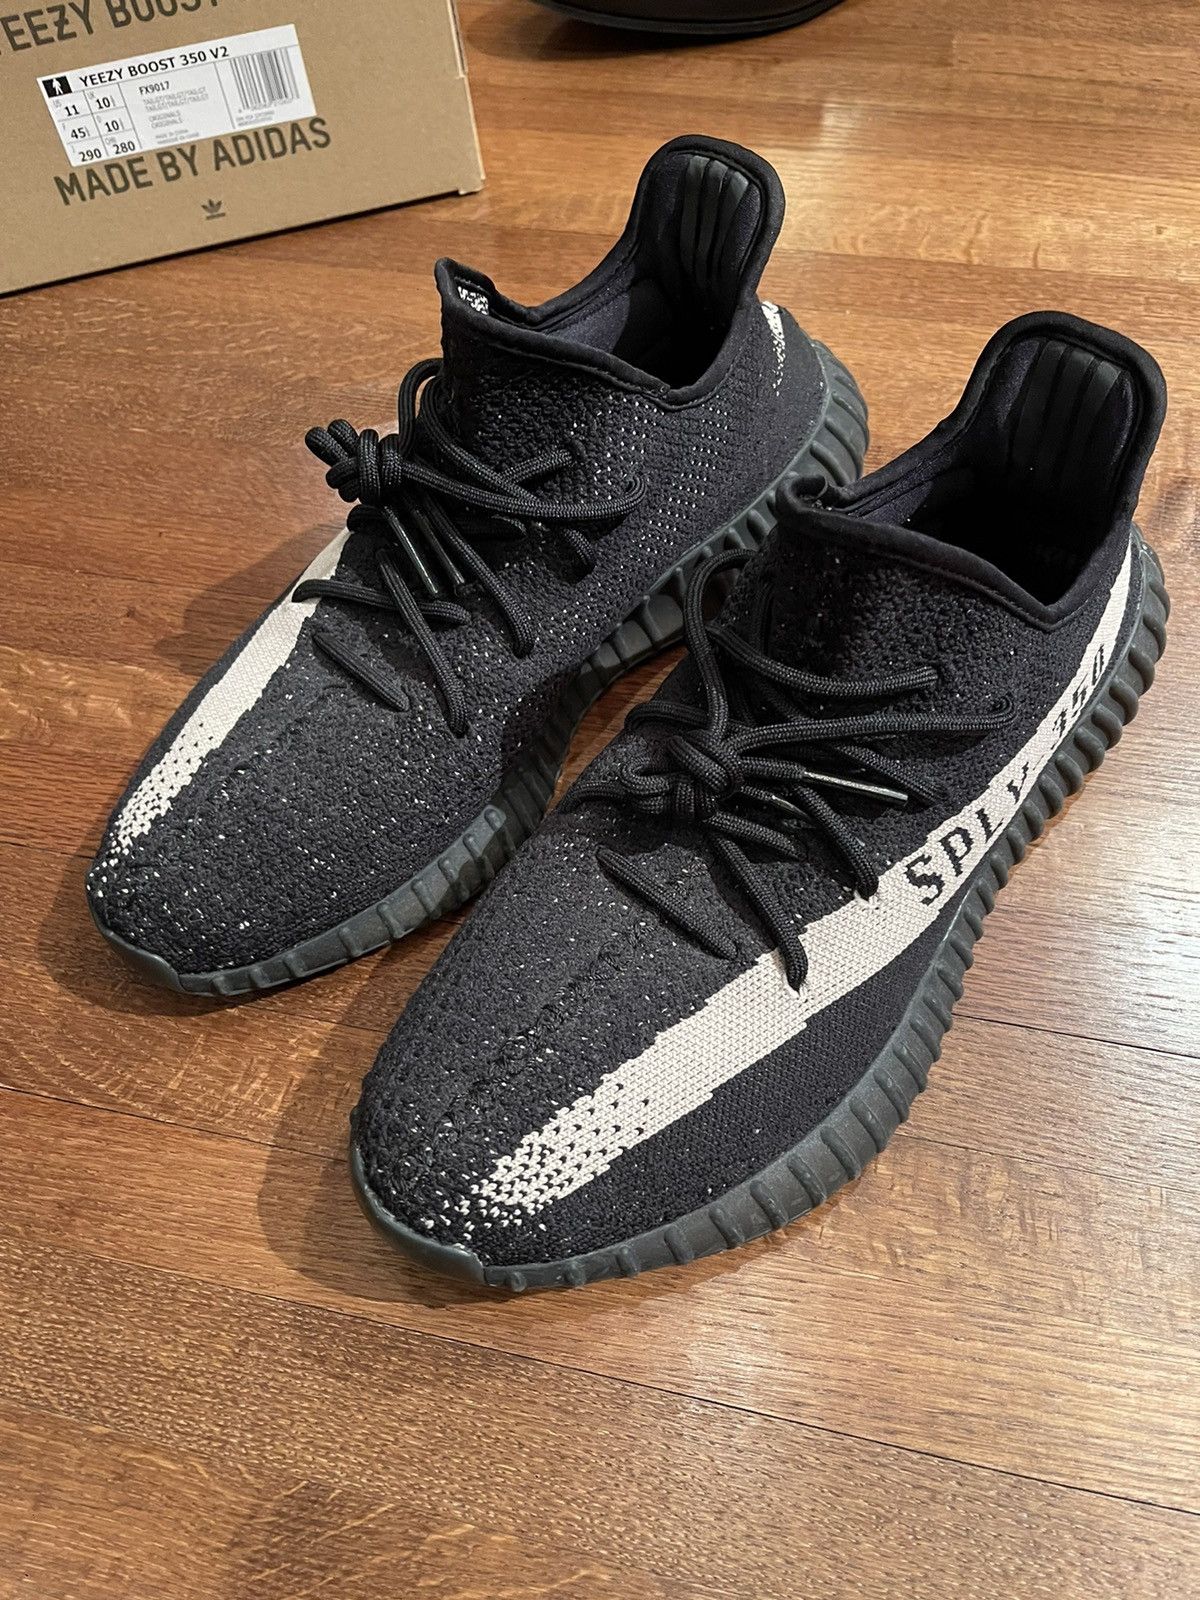 Adidas Adidas Yeezy Boost 350 V2 'Core Black White) Shoes | Grailed